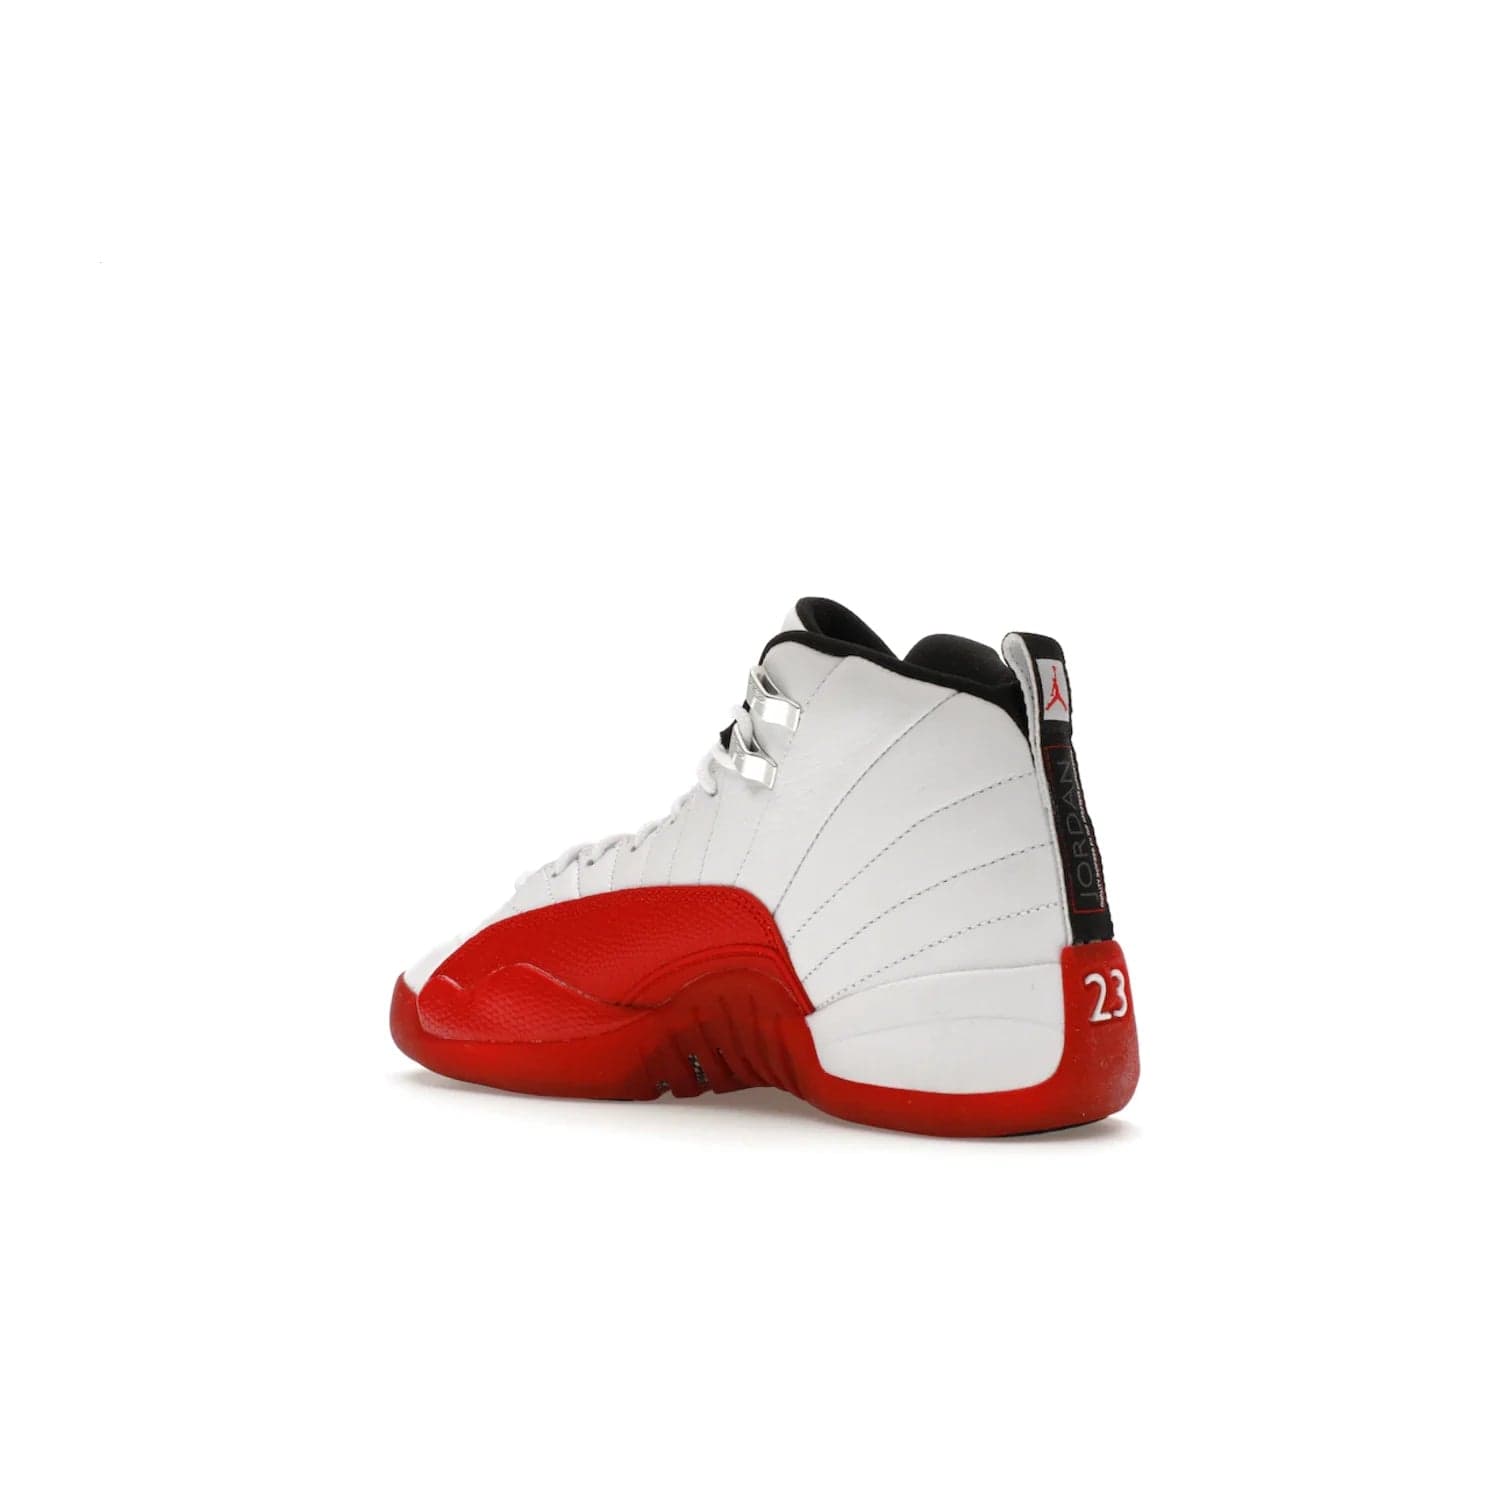 Jordan 12 Retro Cherry (2023) (GS) - Image 23 - Only at www.BallersClubKickz.com - Grab the Jordan 12 Retro Cherry (2023) (GS) and show off your signature style with these iconic kicks. Dressed in White, Black and Varsity Red, these timeless kicks are sure to turn heads. Available October 28, 2023.